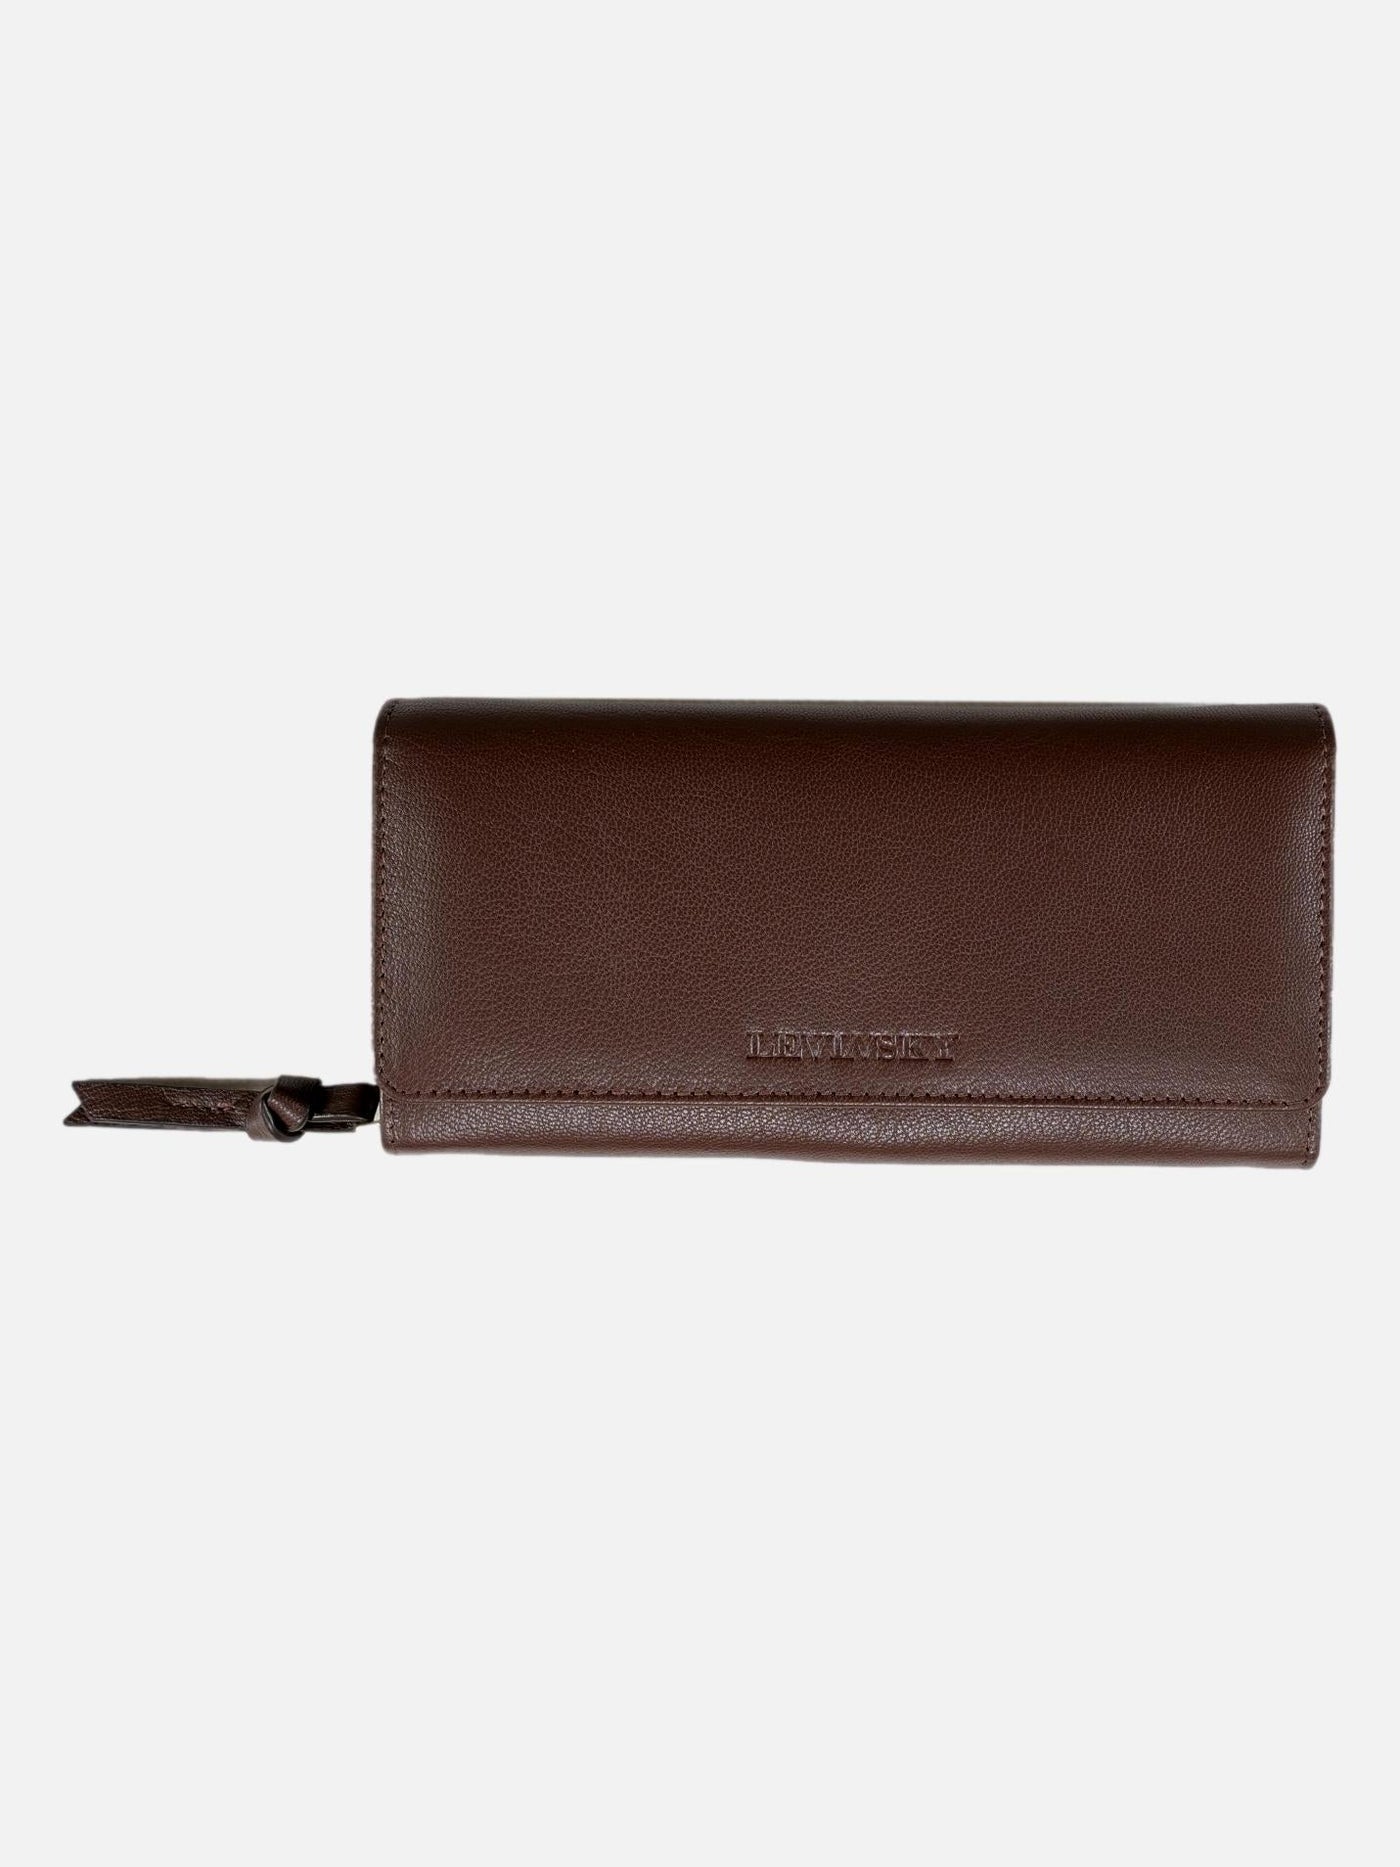 LW-0019 Wallet - Leather - Accesories - Brown